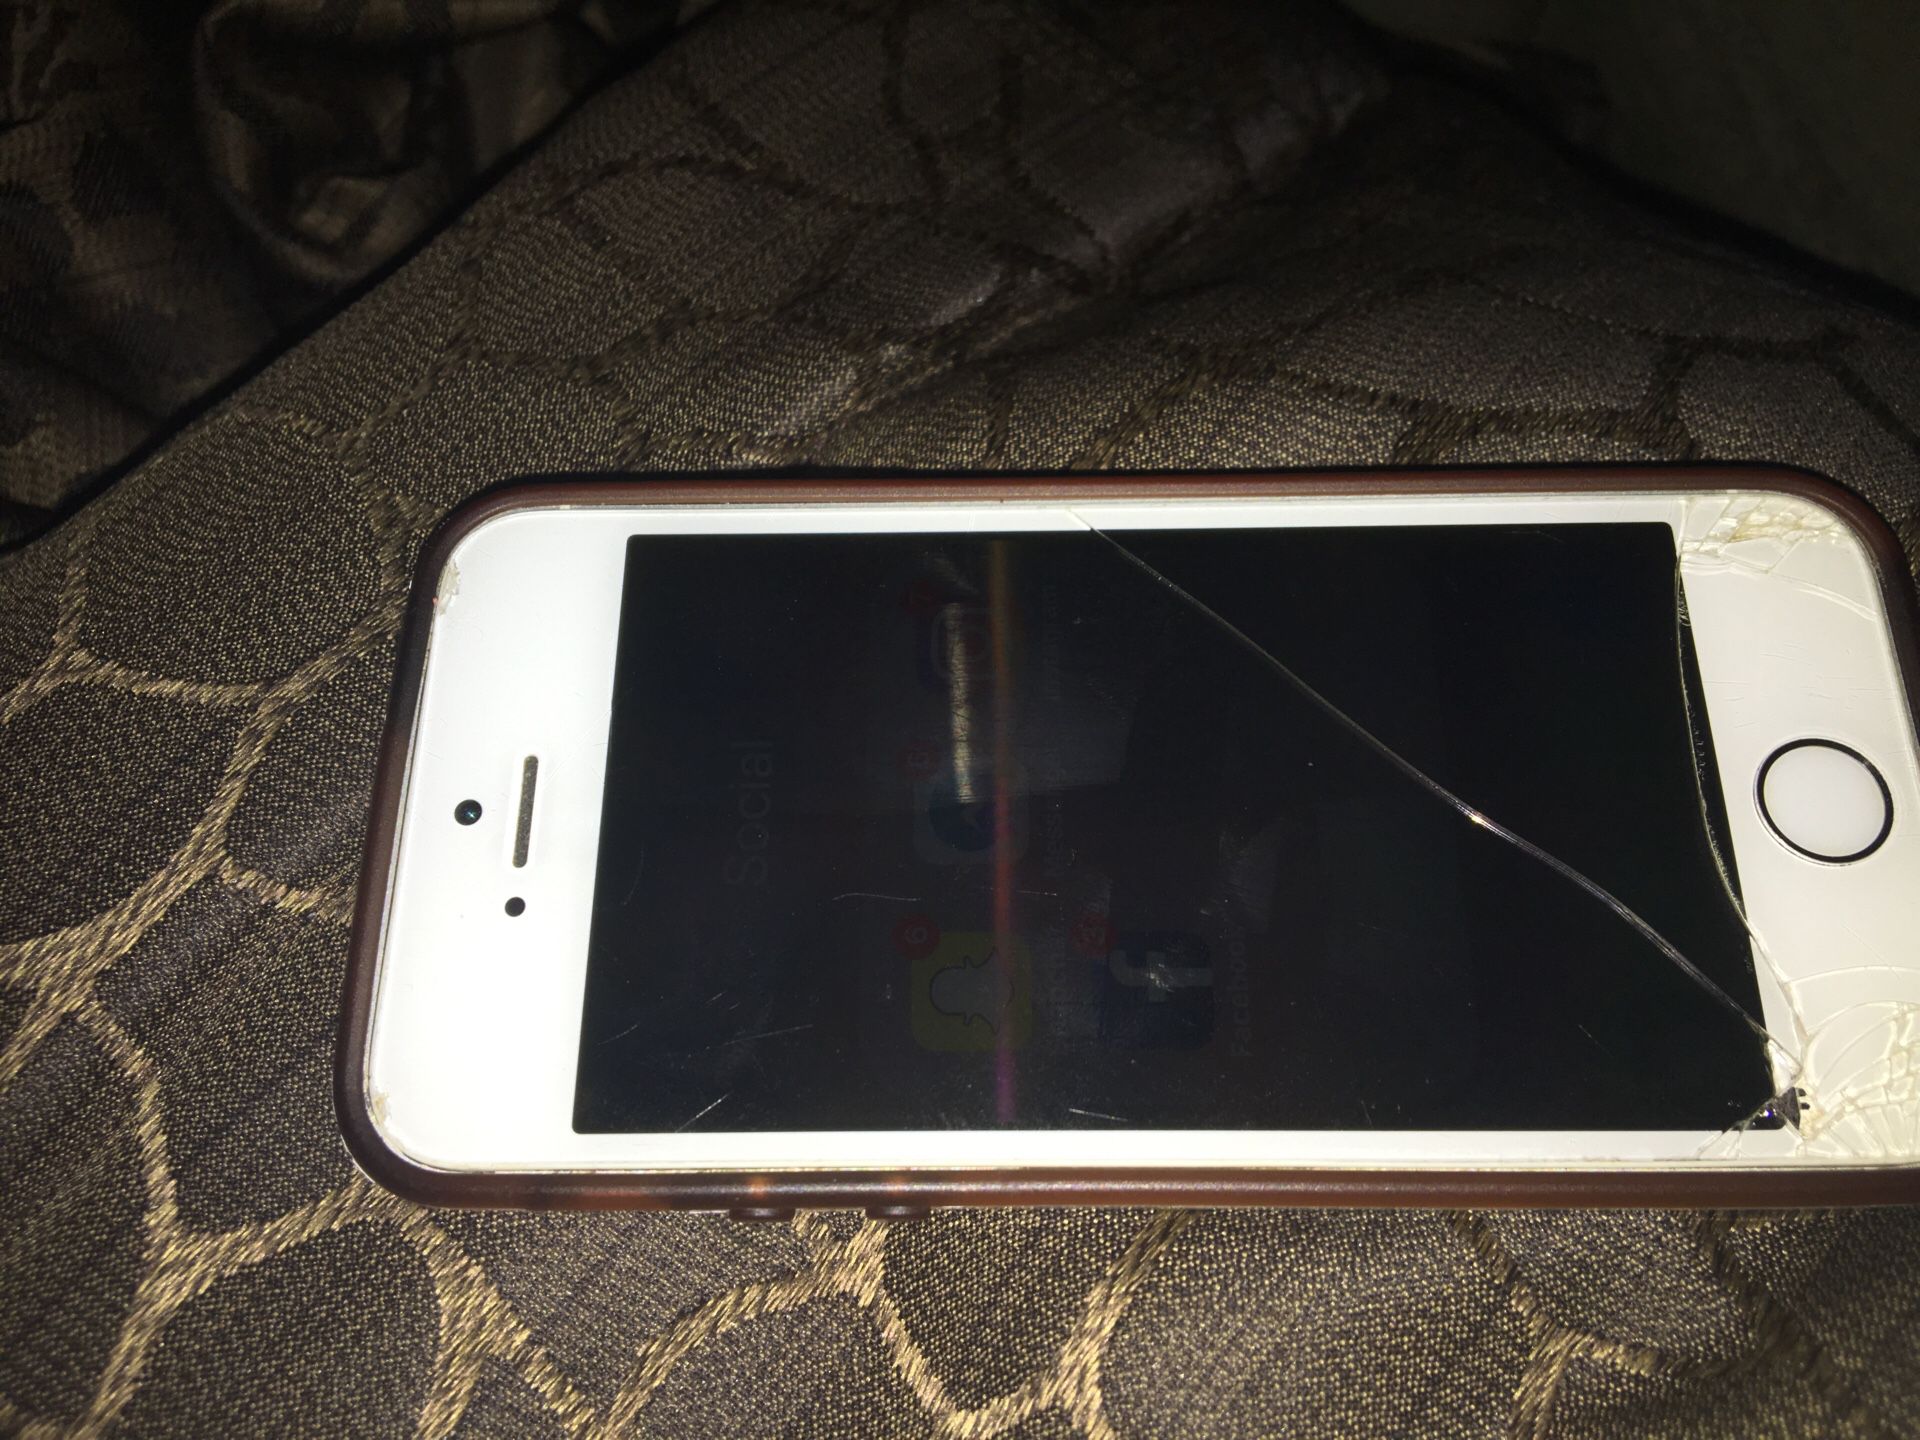 iPhone 5s it’s cracked a little but works prefect